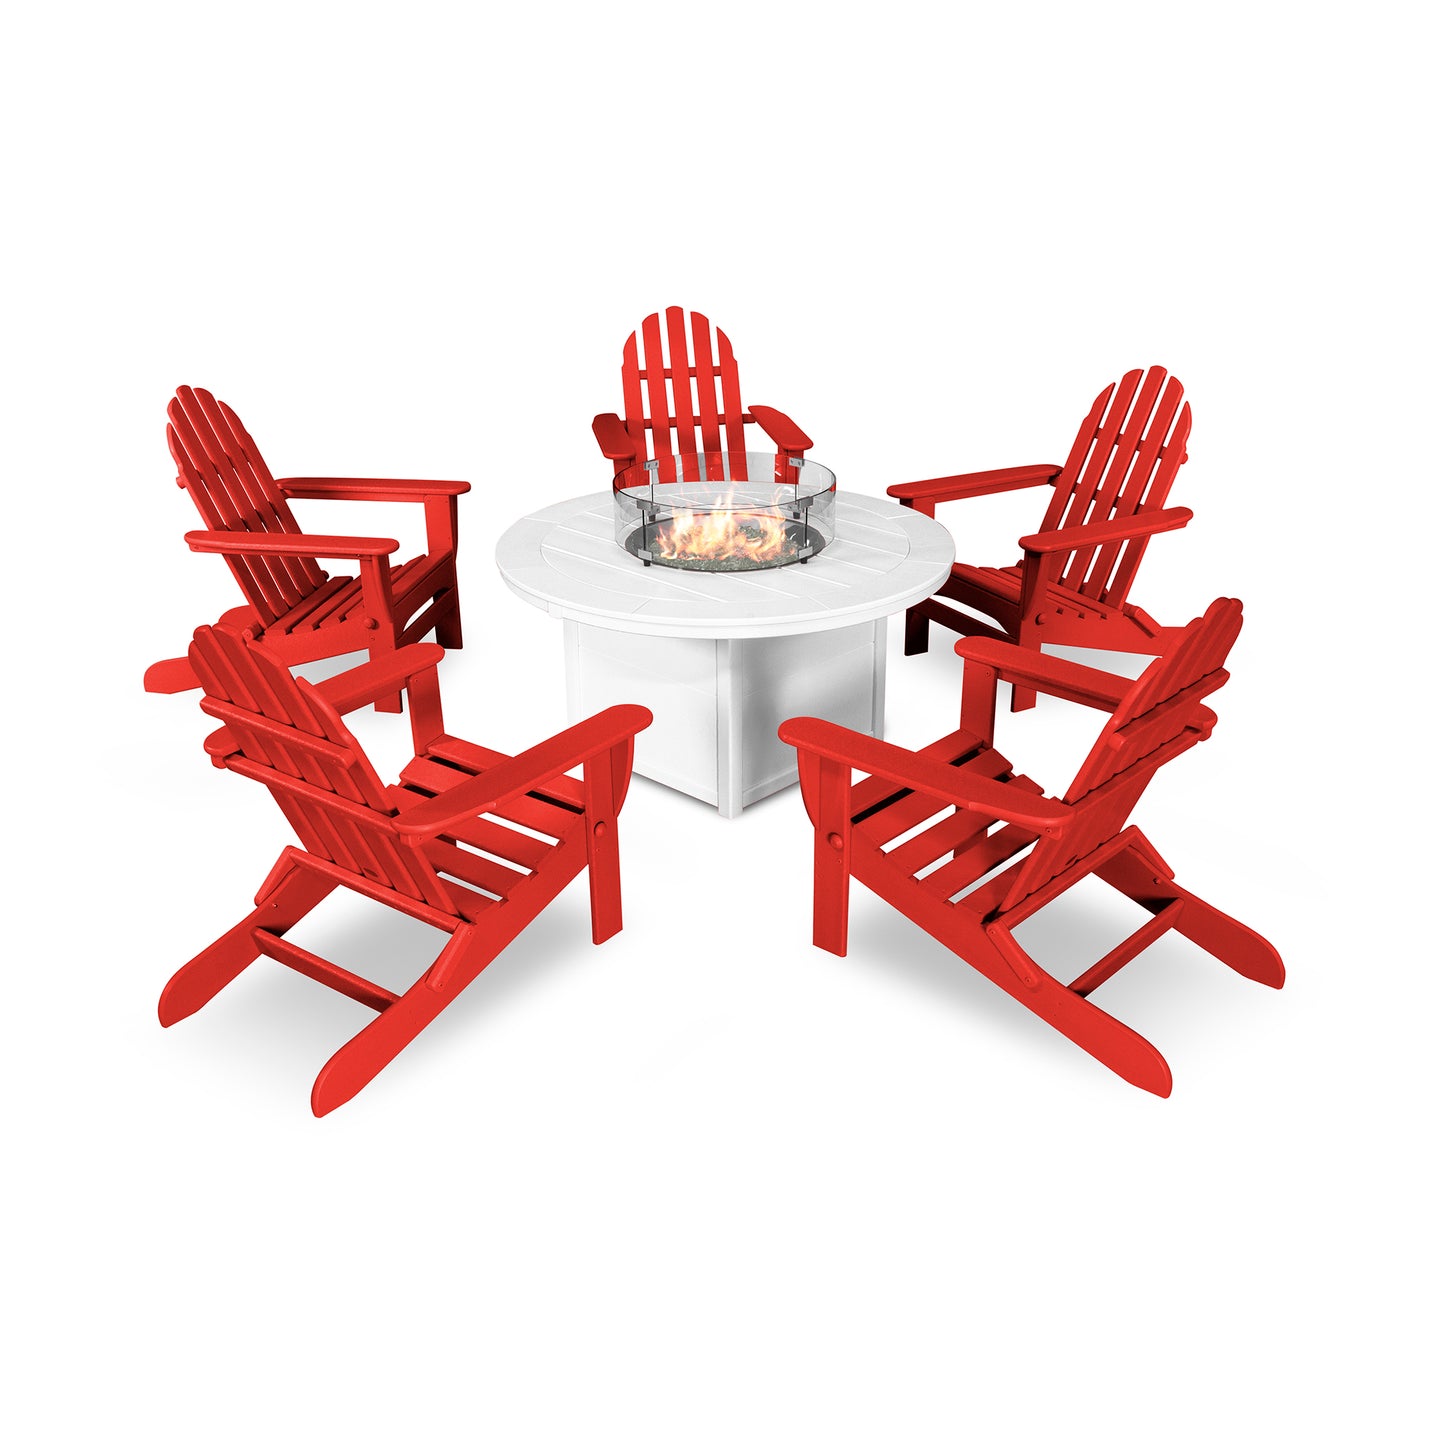 Four red POLYWOOD Classic Folding Adirondack chairs arranged around a white circular POLYWOOD fire pit table, set against a plain white background.